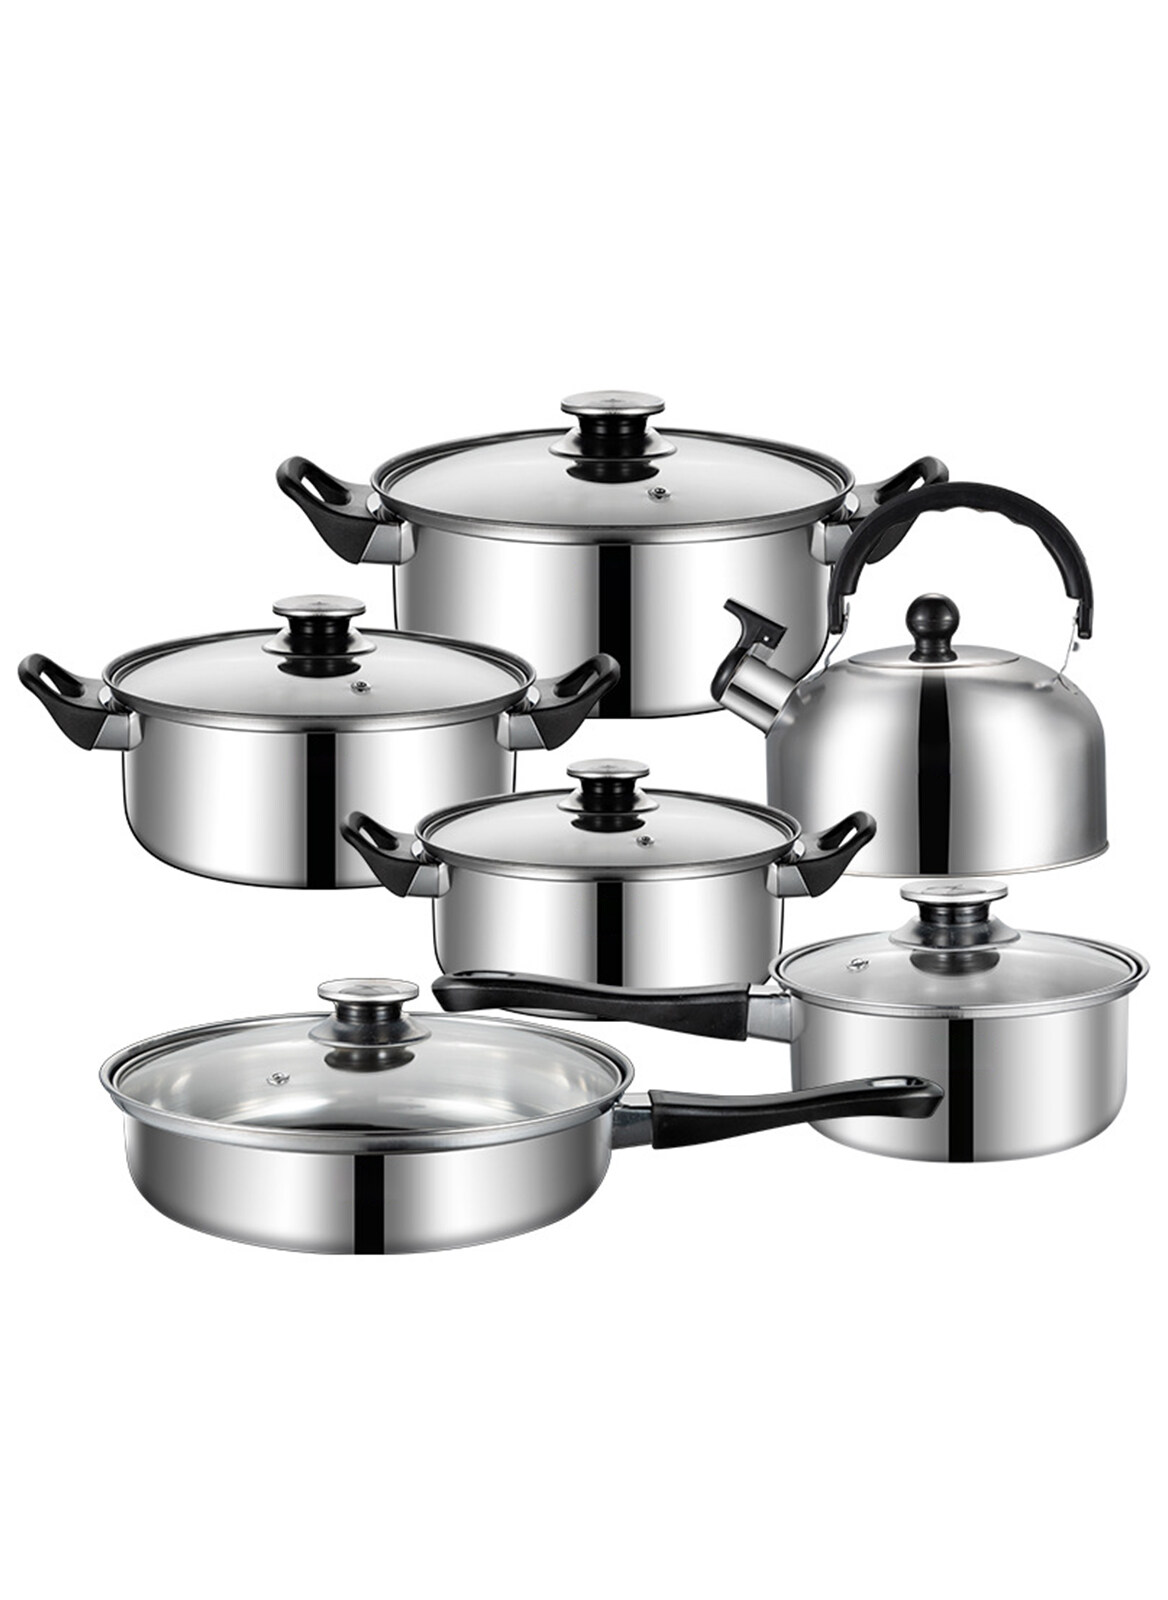 6-Piece Stainless Steel Pot and Kettle Set